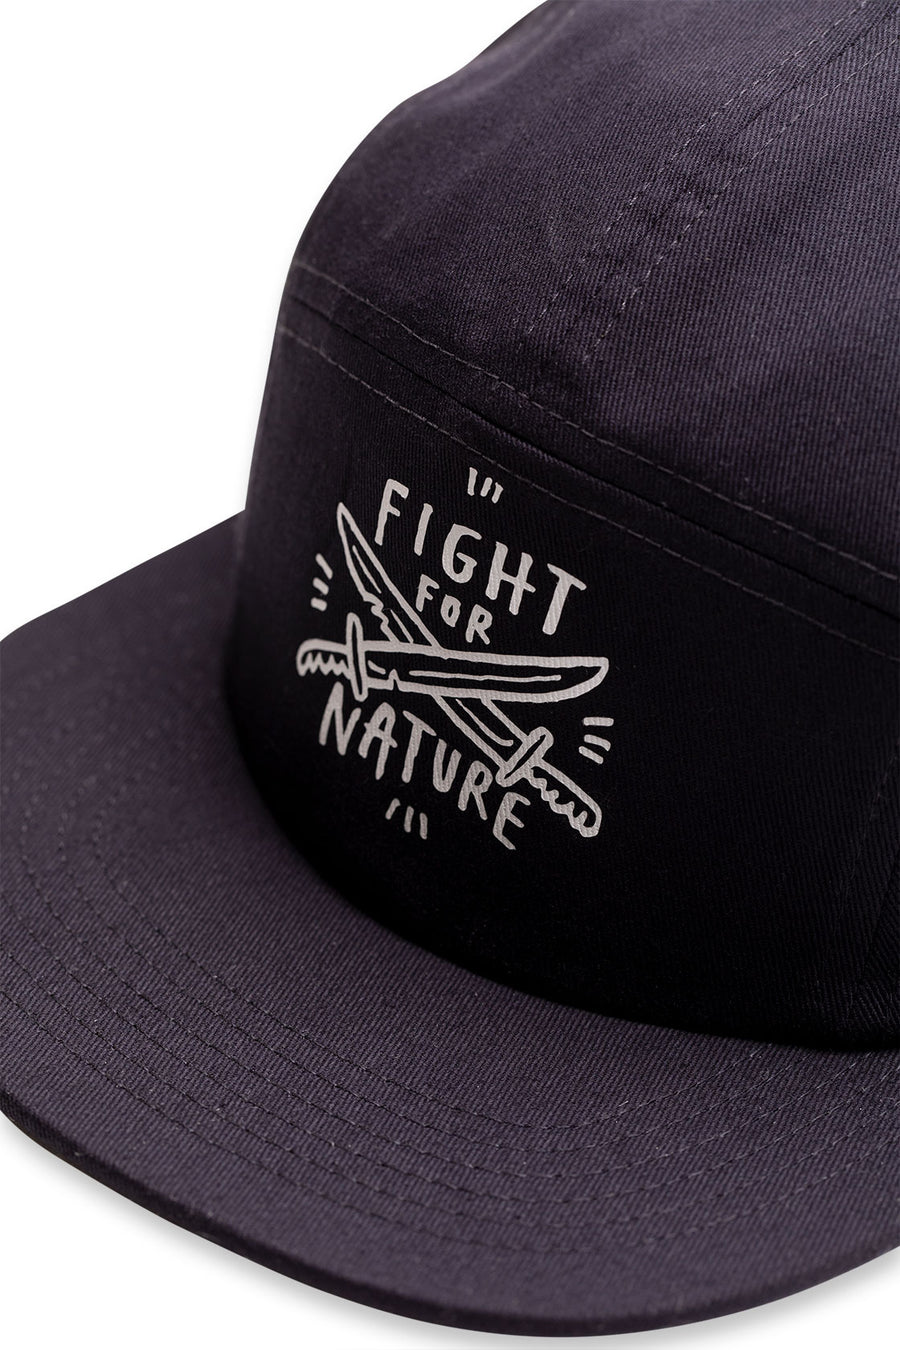 Fight for Nature - 5 Panel Cap